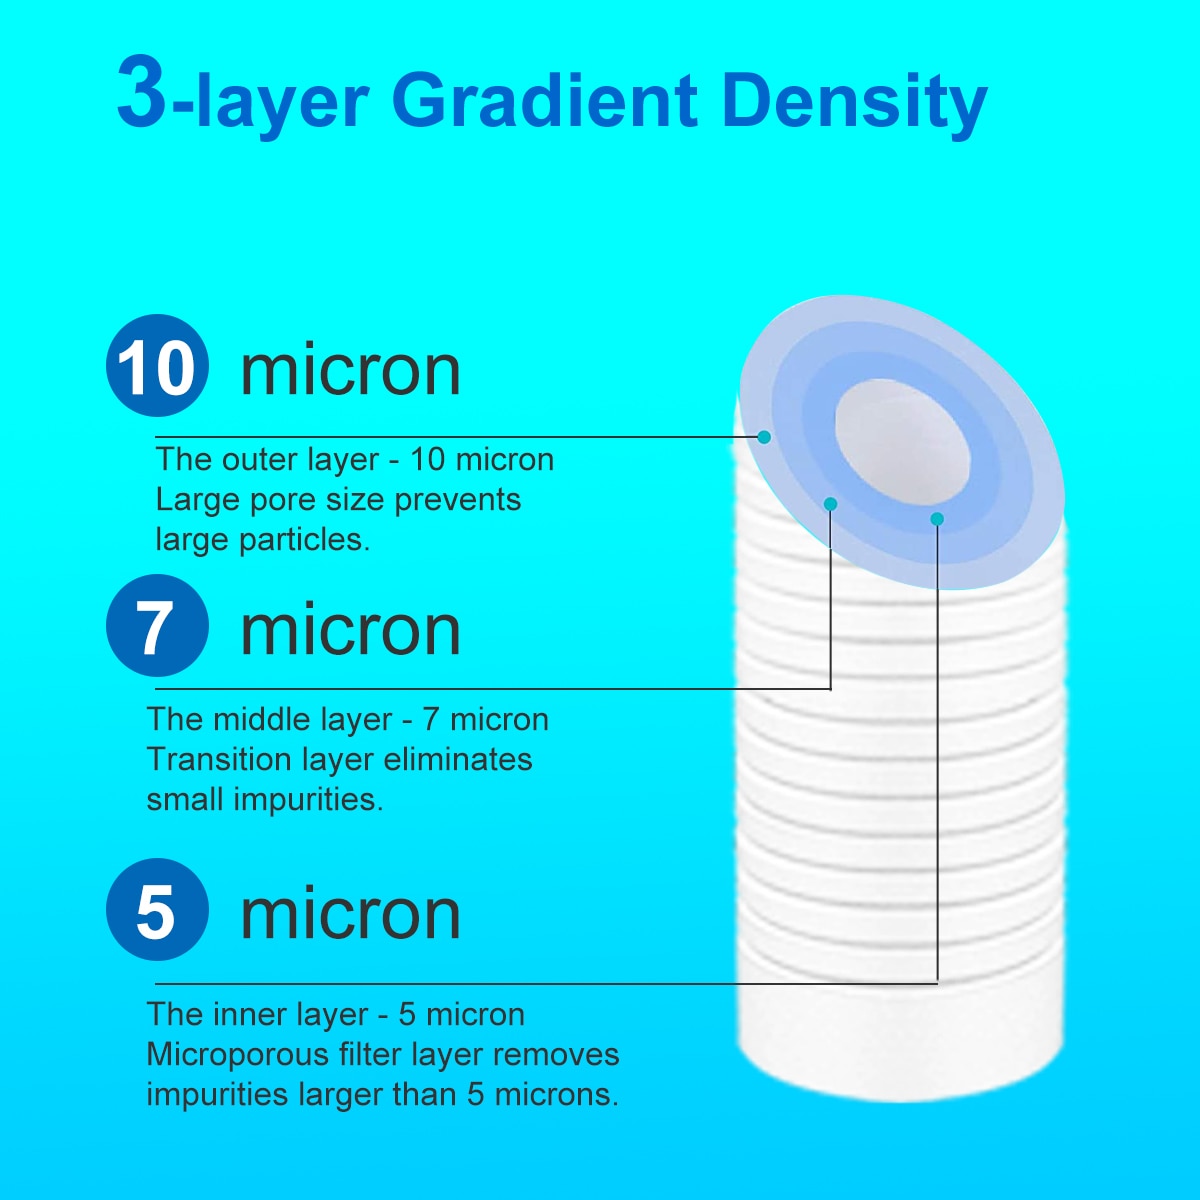 ALTHY 5 Micron Whole House Sediment Water Filter System Prefilter Purifier, 10 Inch PPFcotton Pre filter  Hardware > Plumbing > Water Dispensing & Filtration 212.99 EZYSELLA SHOP